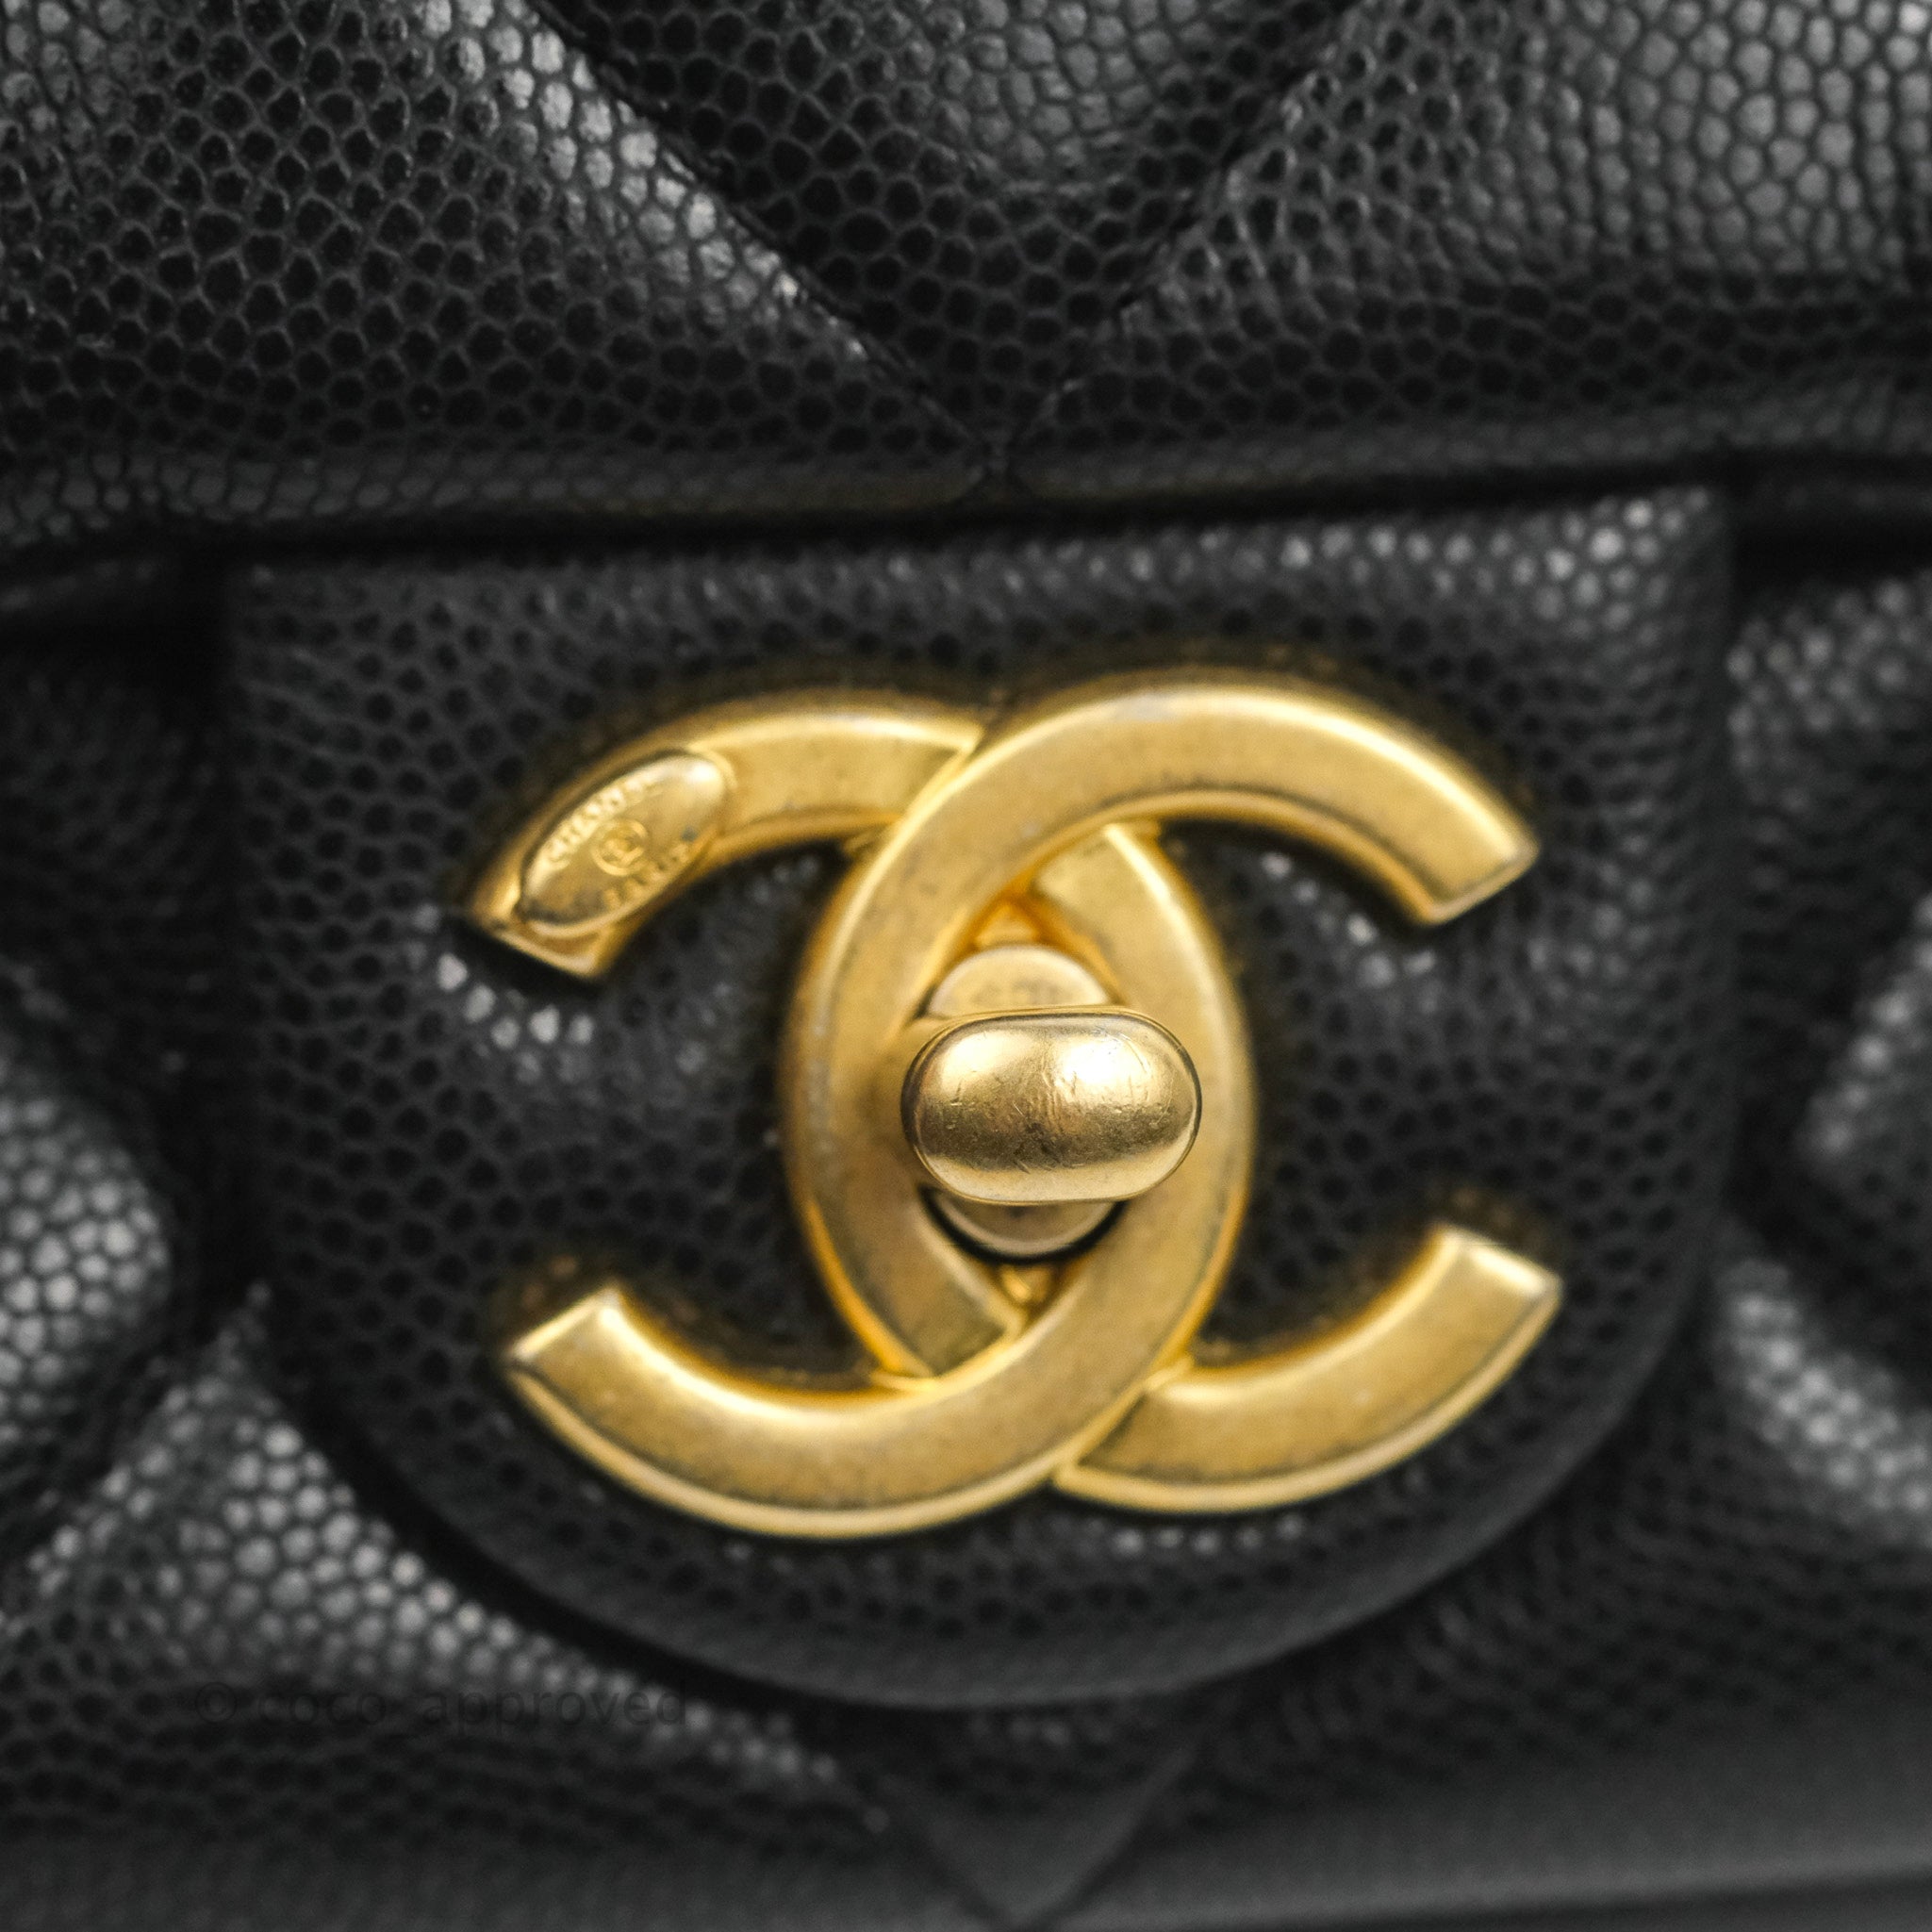 Chanel Mini Green 22a Rectangle, Gold Hardware, New In Box